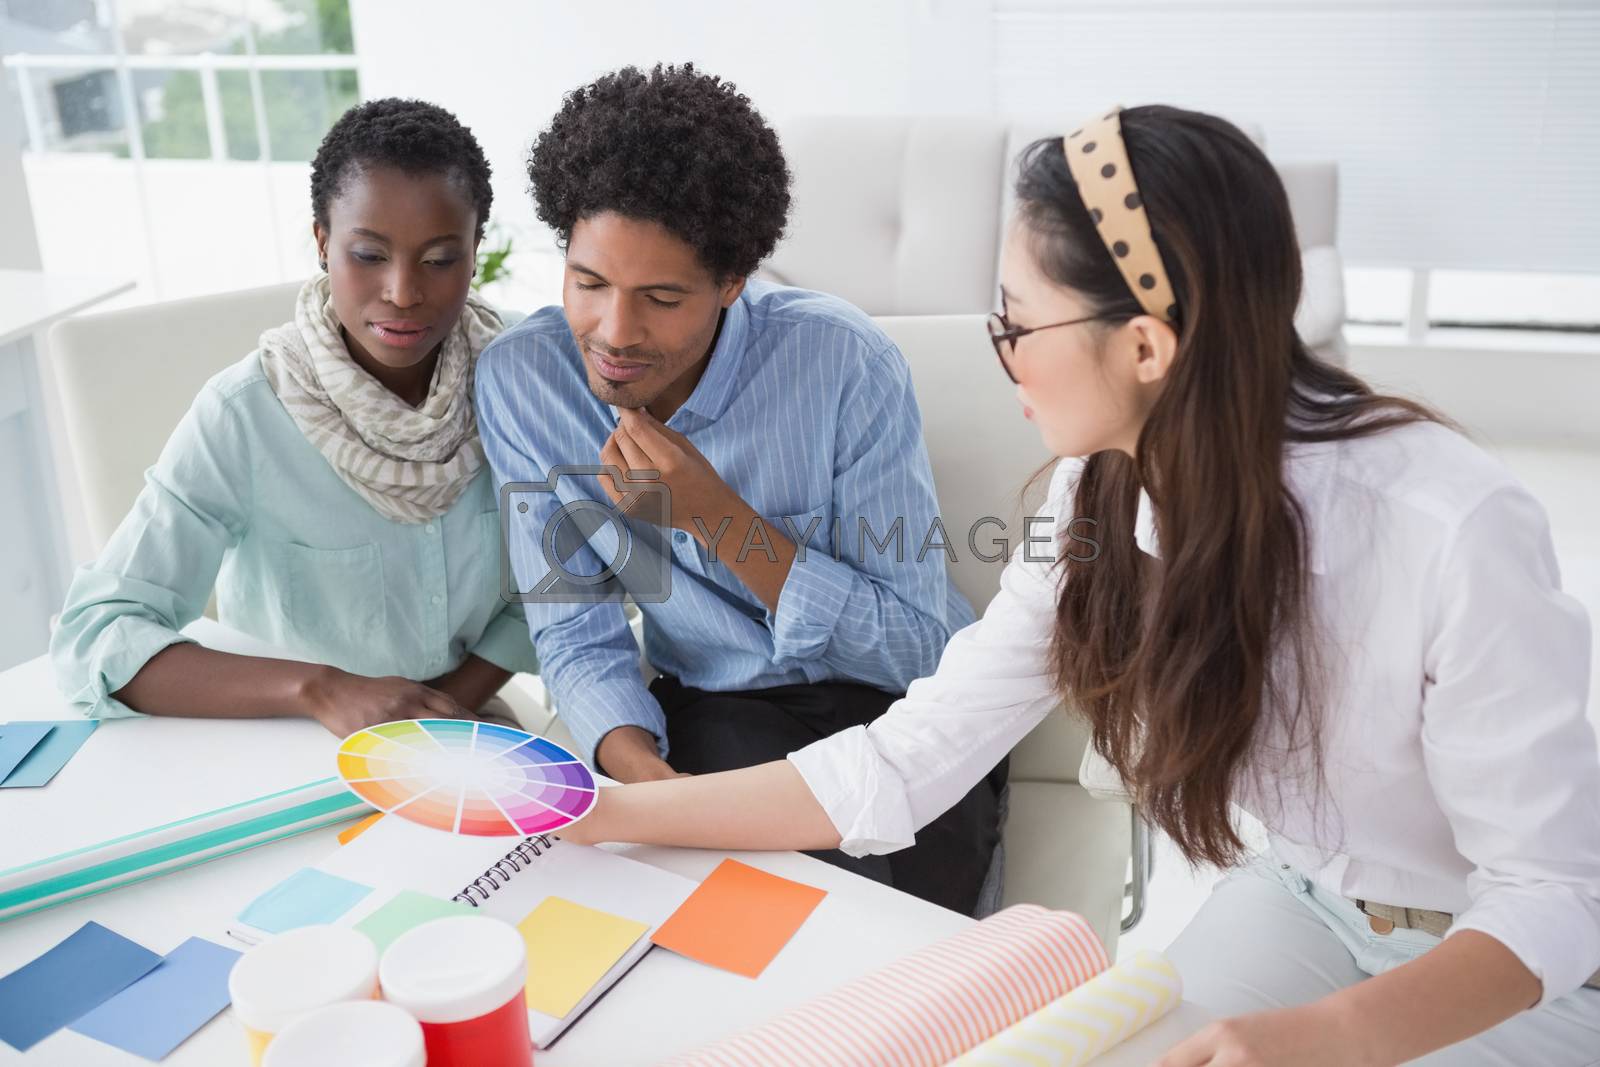 Royalty free image of Interior designer speaking with clients by Wavebreakmedia